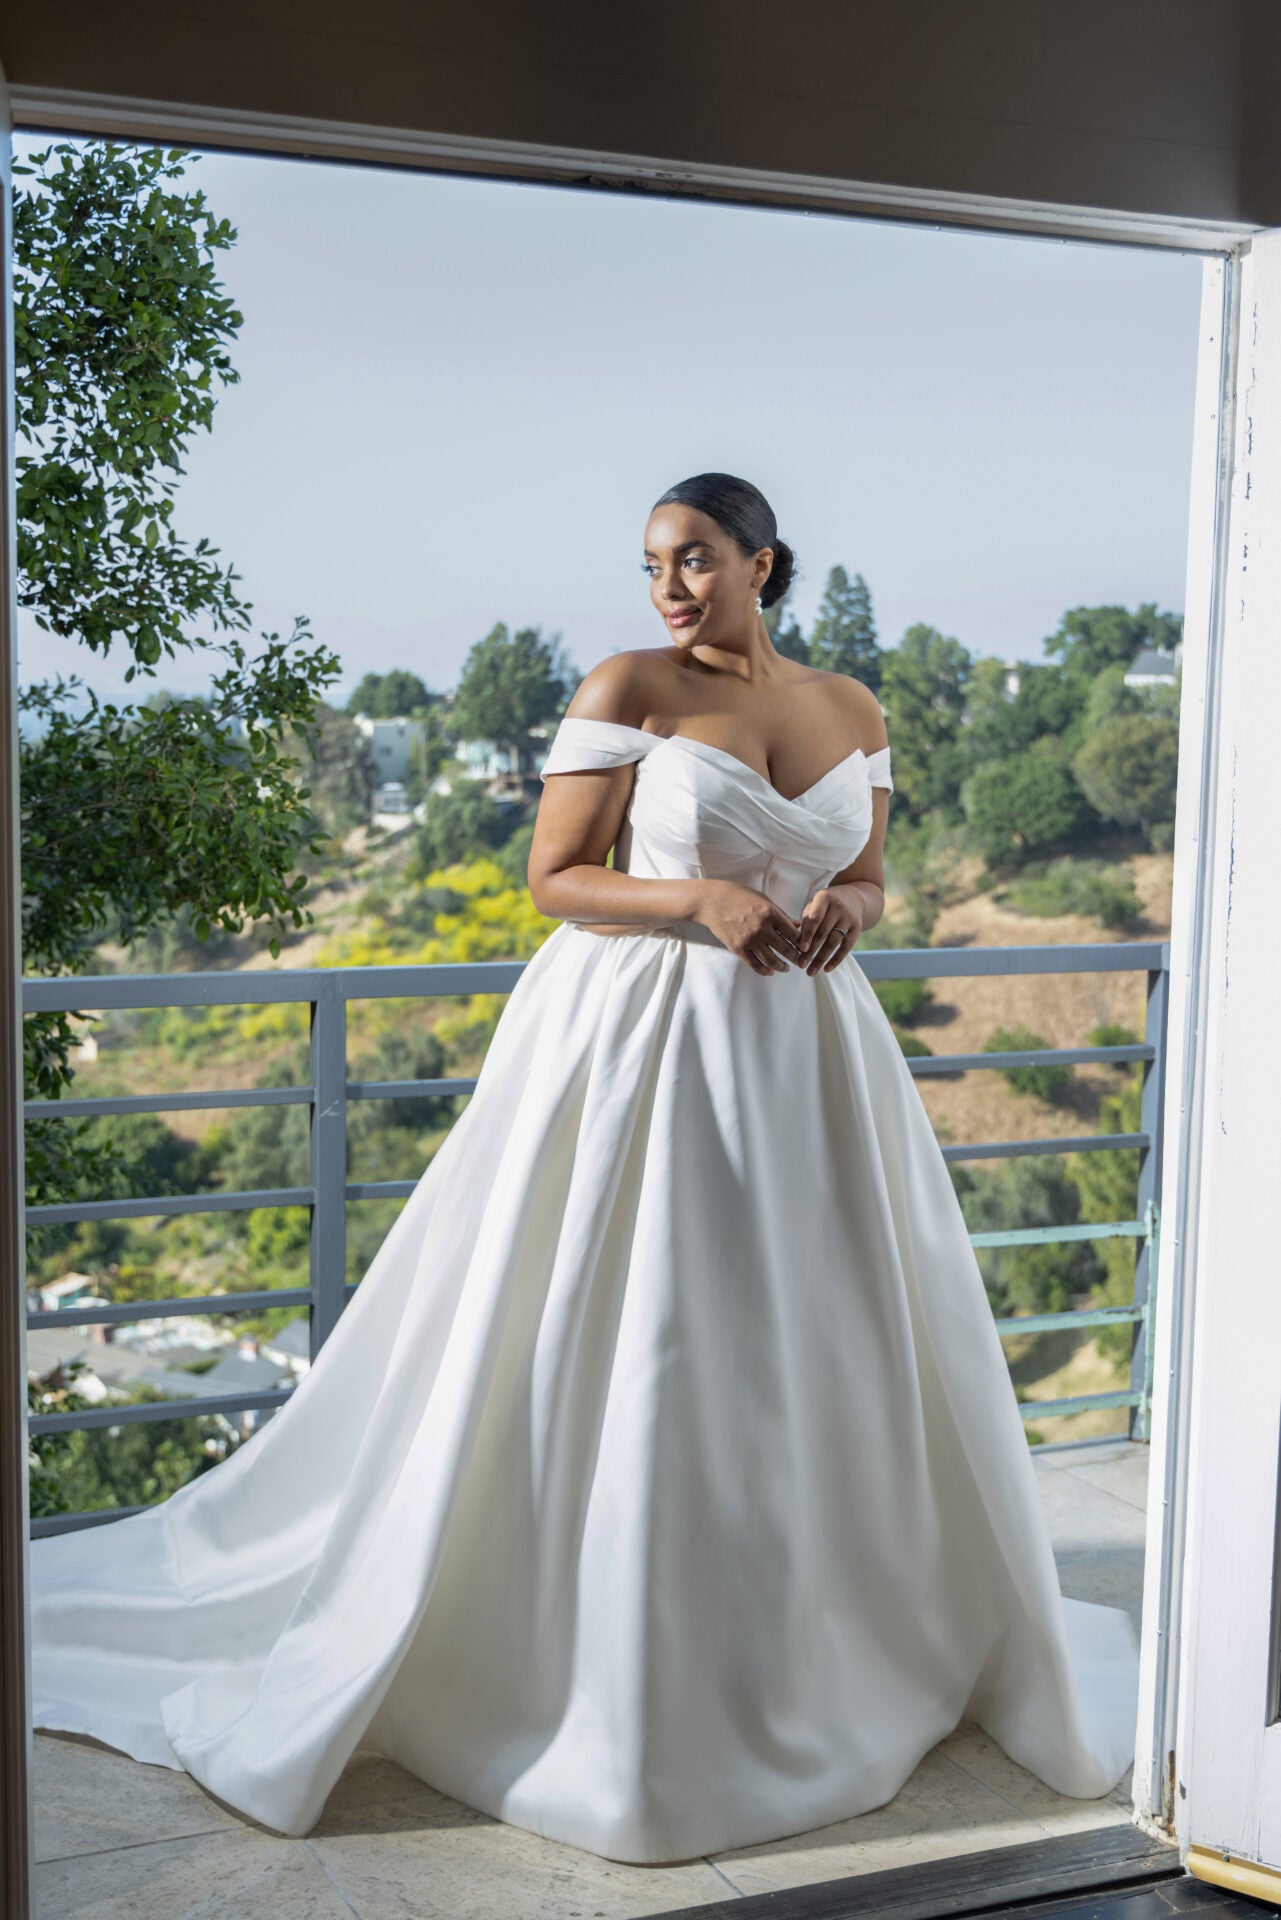 Detachable Off The Shoulder Ball Gown Wedding Dress With Corset Bodice by Martina Liana - Image 1